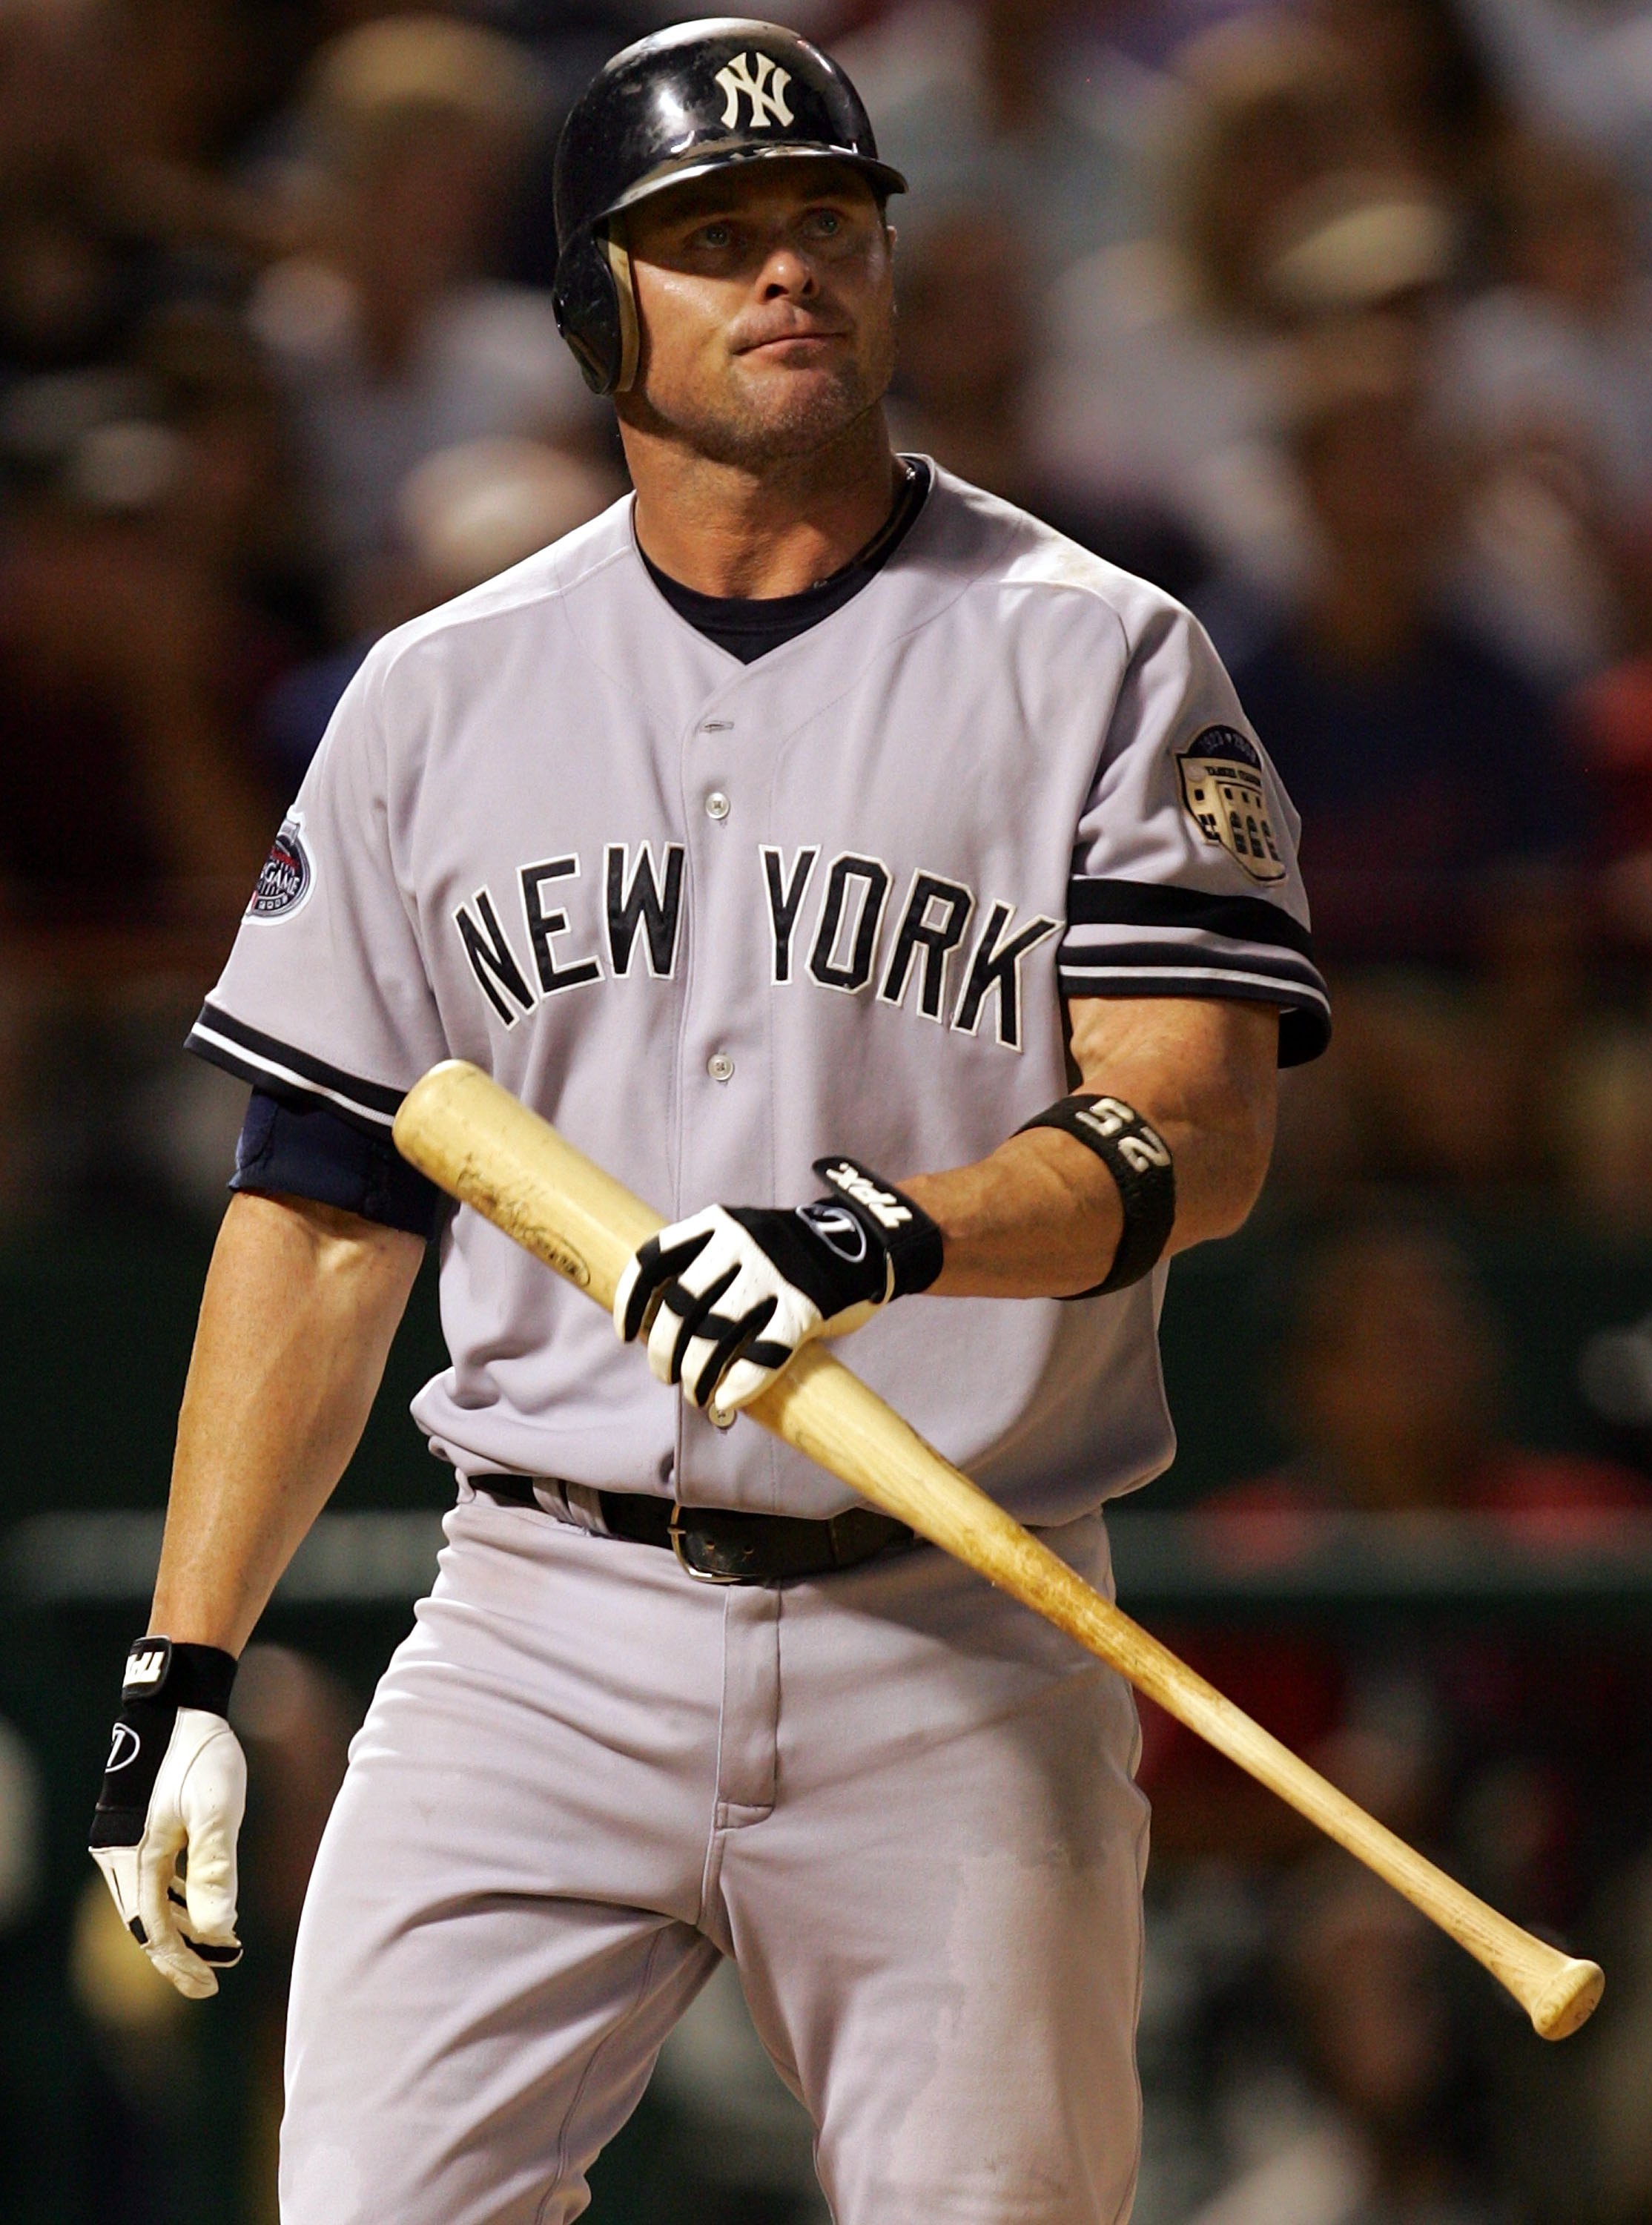 ARLINGTON, TX - AUGUST 06:  Jason Giambi #25 of the New York Yankees during play against the Texas Rangers on August 6, 2008 at Rangers Ballpark in Arlington, Texas.  (Photo by Ronald Martinez/Getty Images)